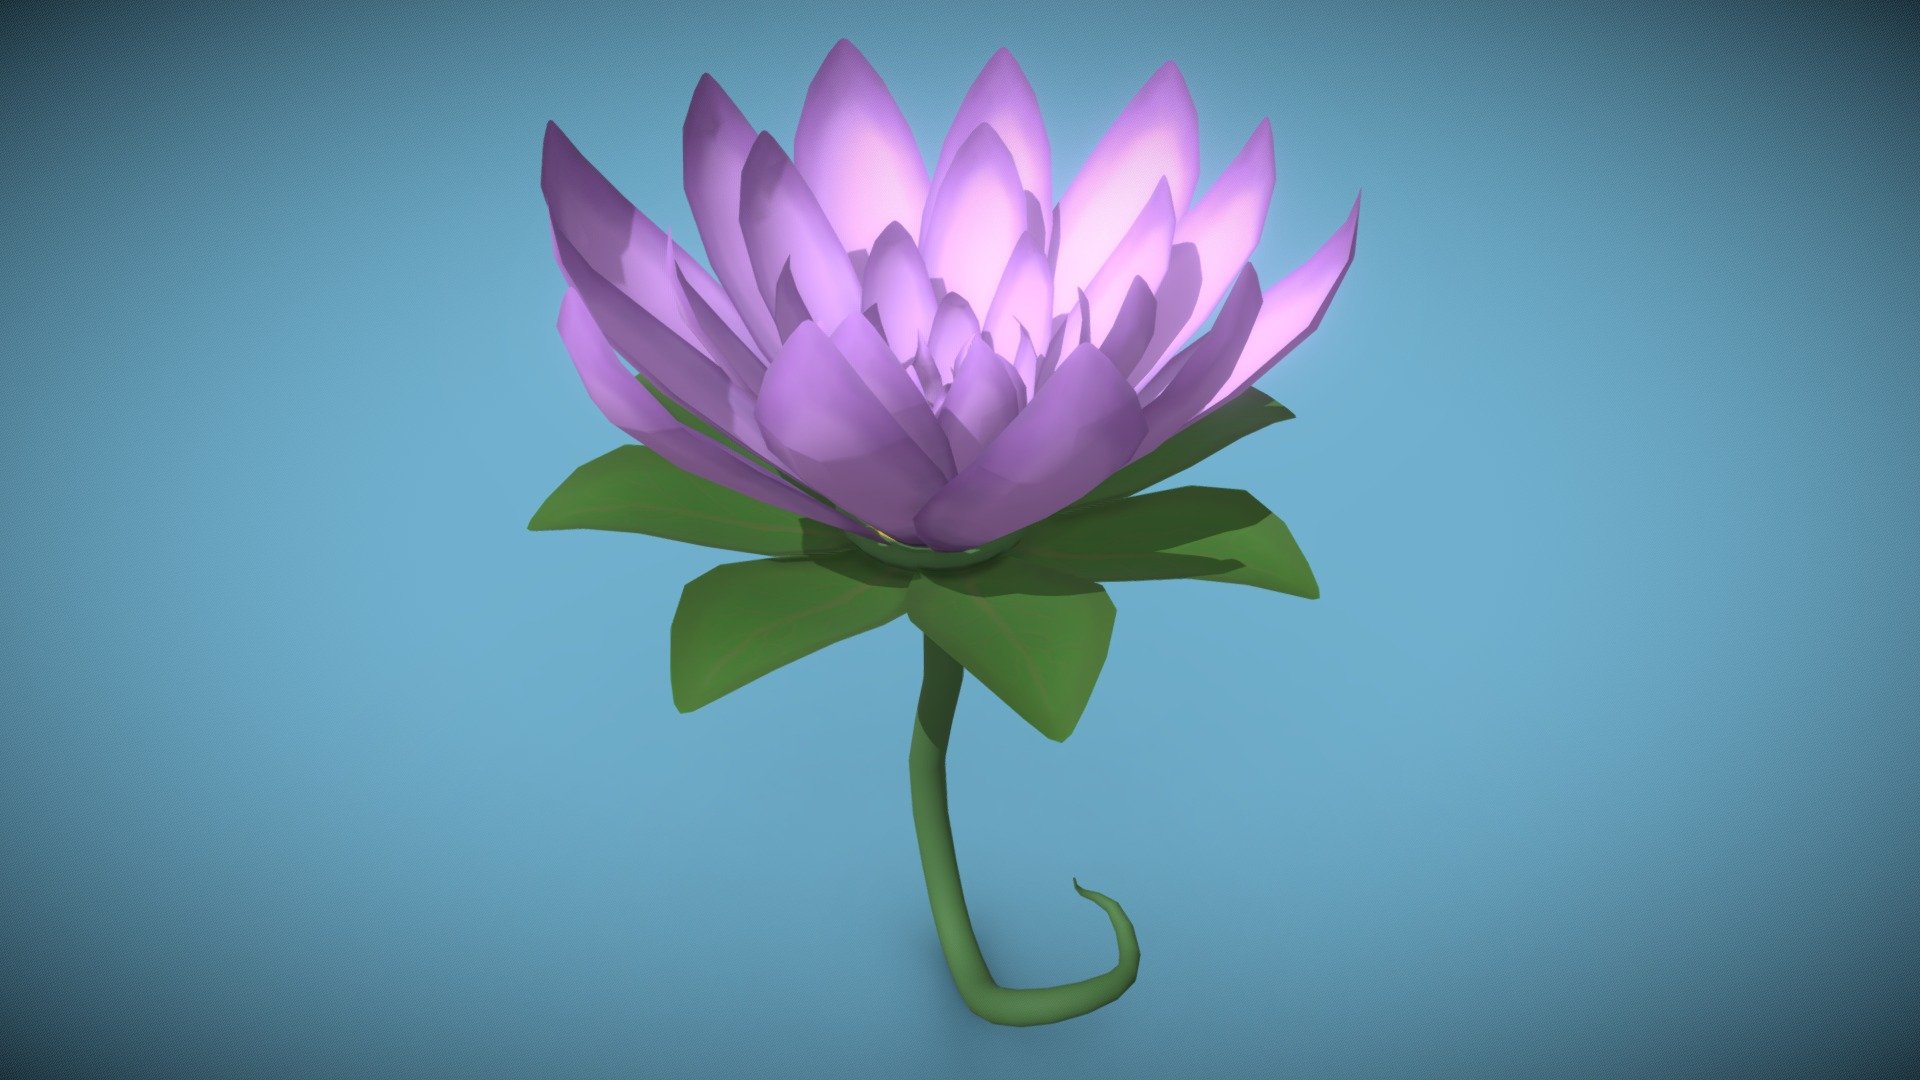 Mid-poly lotus flower in a stylized manner.
Mainly did this as custom painting practice.

It is game-ready for Unreal Engine 4, Unity, Godot, etc. 
I also do commissions, so if you need anything done for a game or a scene, let me know! - Stylized Lotus Flower - Download Free 3D model by Kigha 3d model